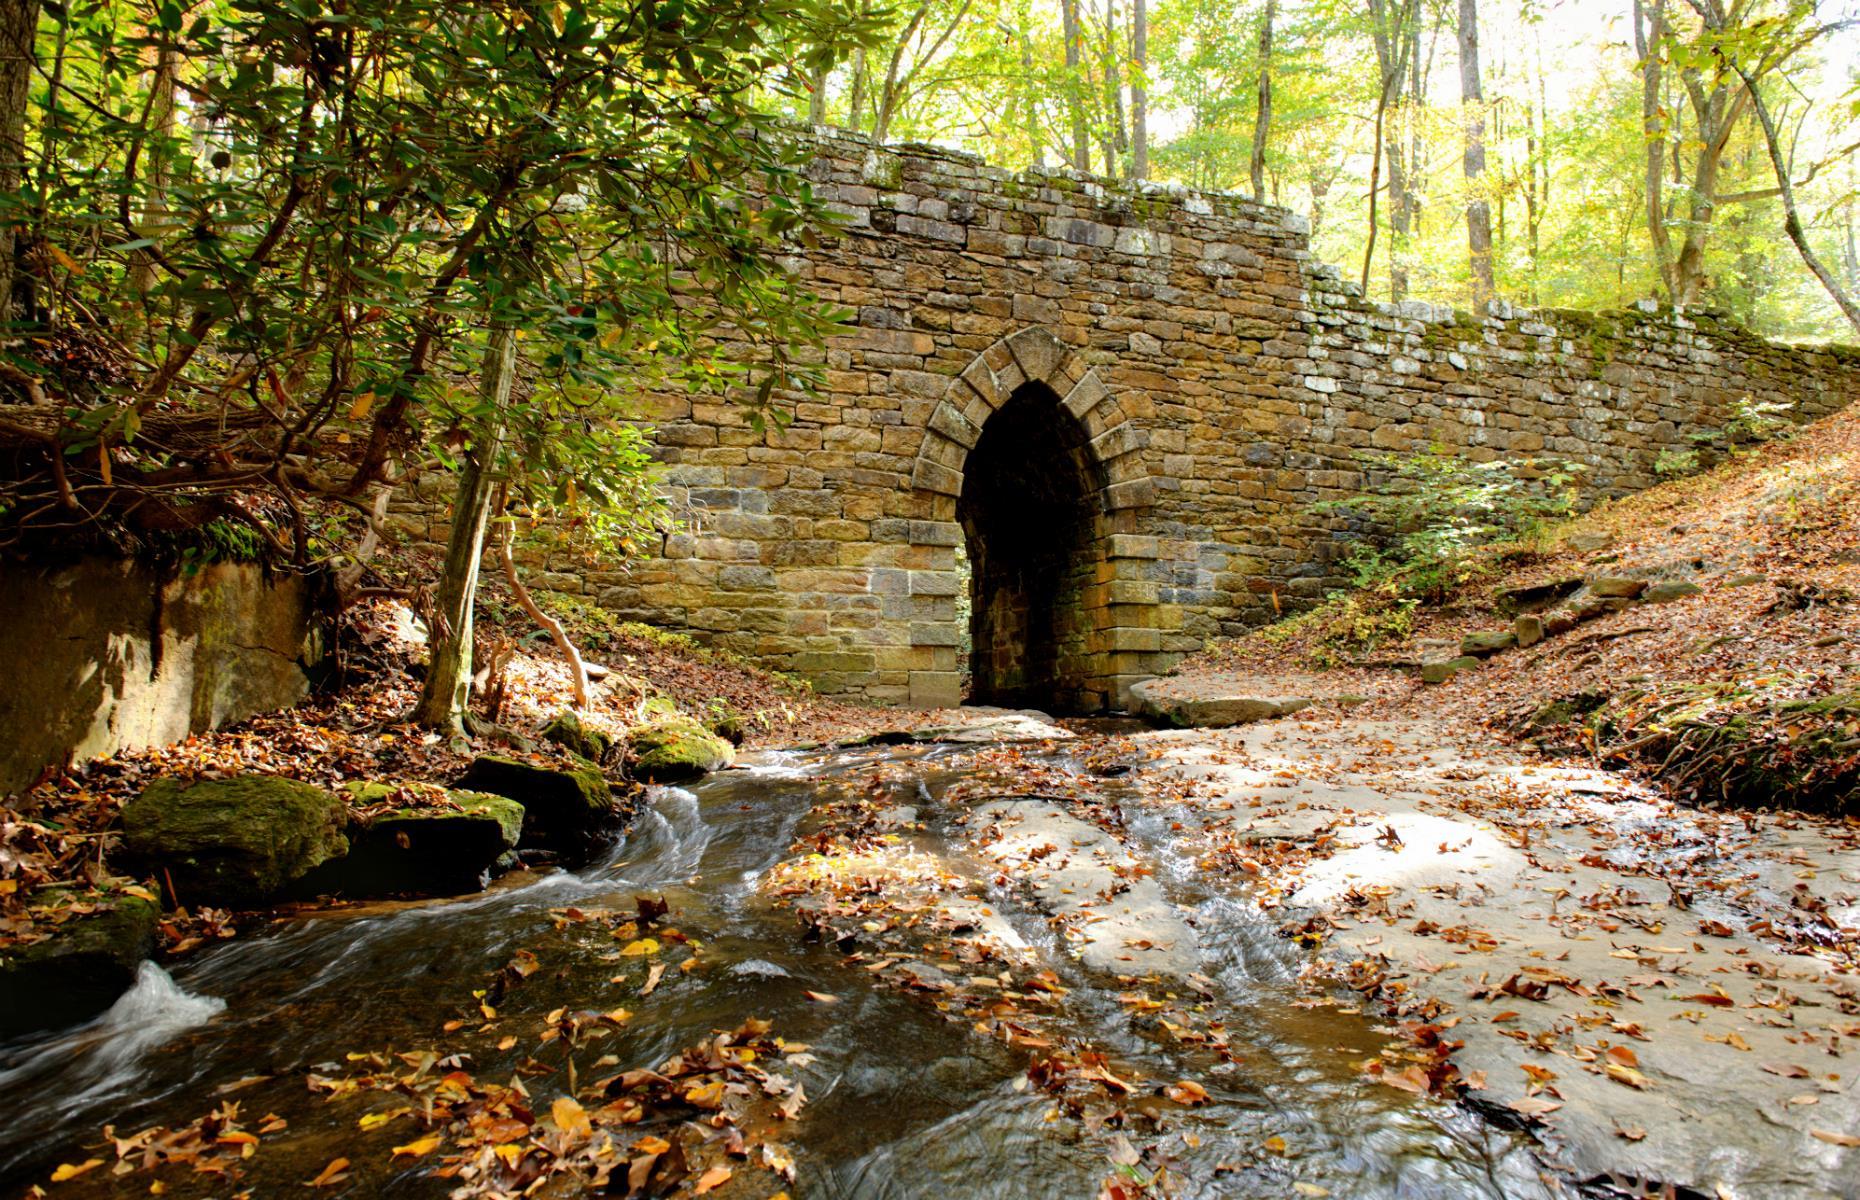 <p>This quaint stone bridge might not seem very sinister at first – especially when compared to the foreboding 19th-century mansions and creaking ghost towns scattered across the States. But the unassuming structure is said to be a magnet for spirits. Many visitors have reported feeling a strange presence here and one ghost hunter even claims to have seen a pair of shining orbs hovering near it. </p>